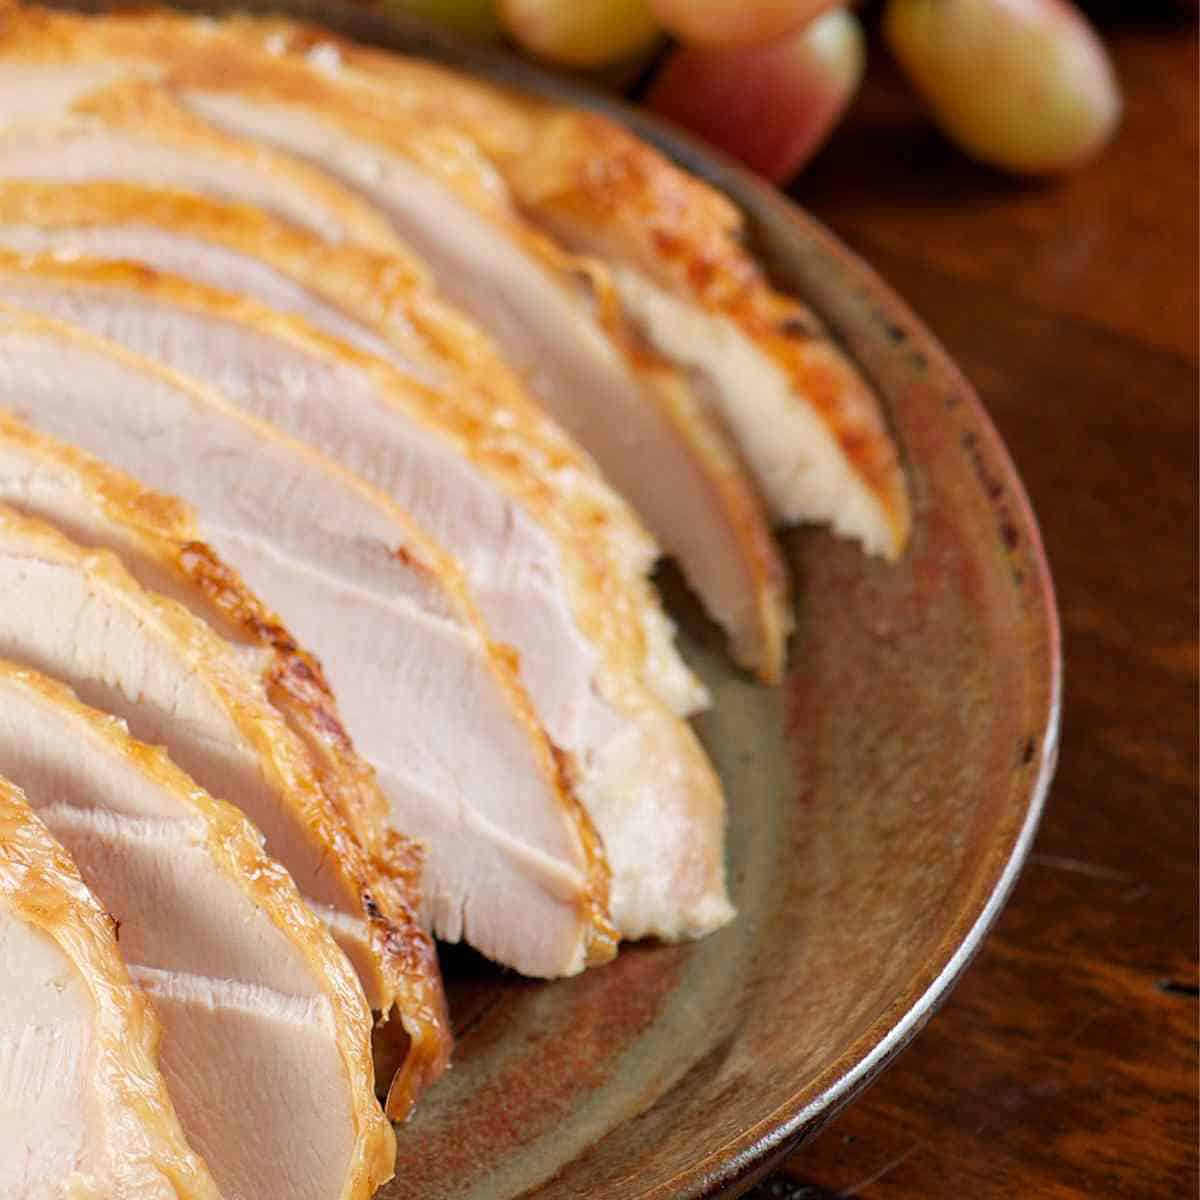 Sliced turkey on a ceramic platter, with grapes in the background.